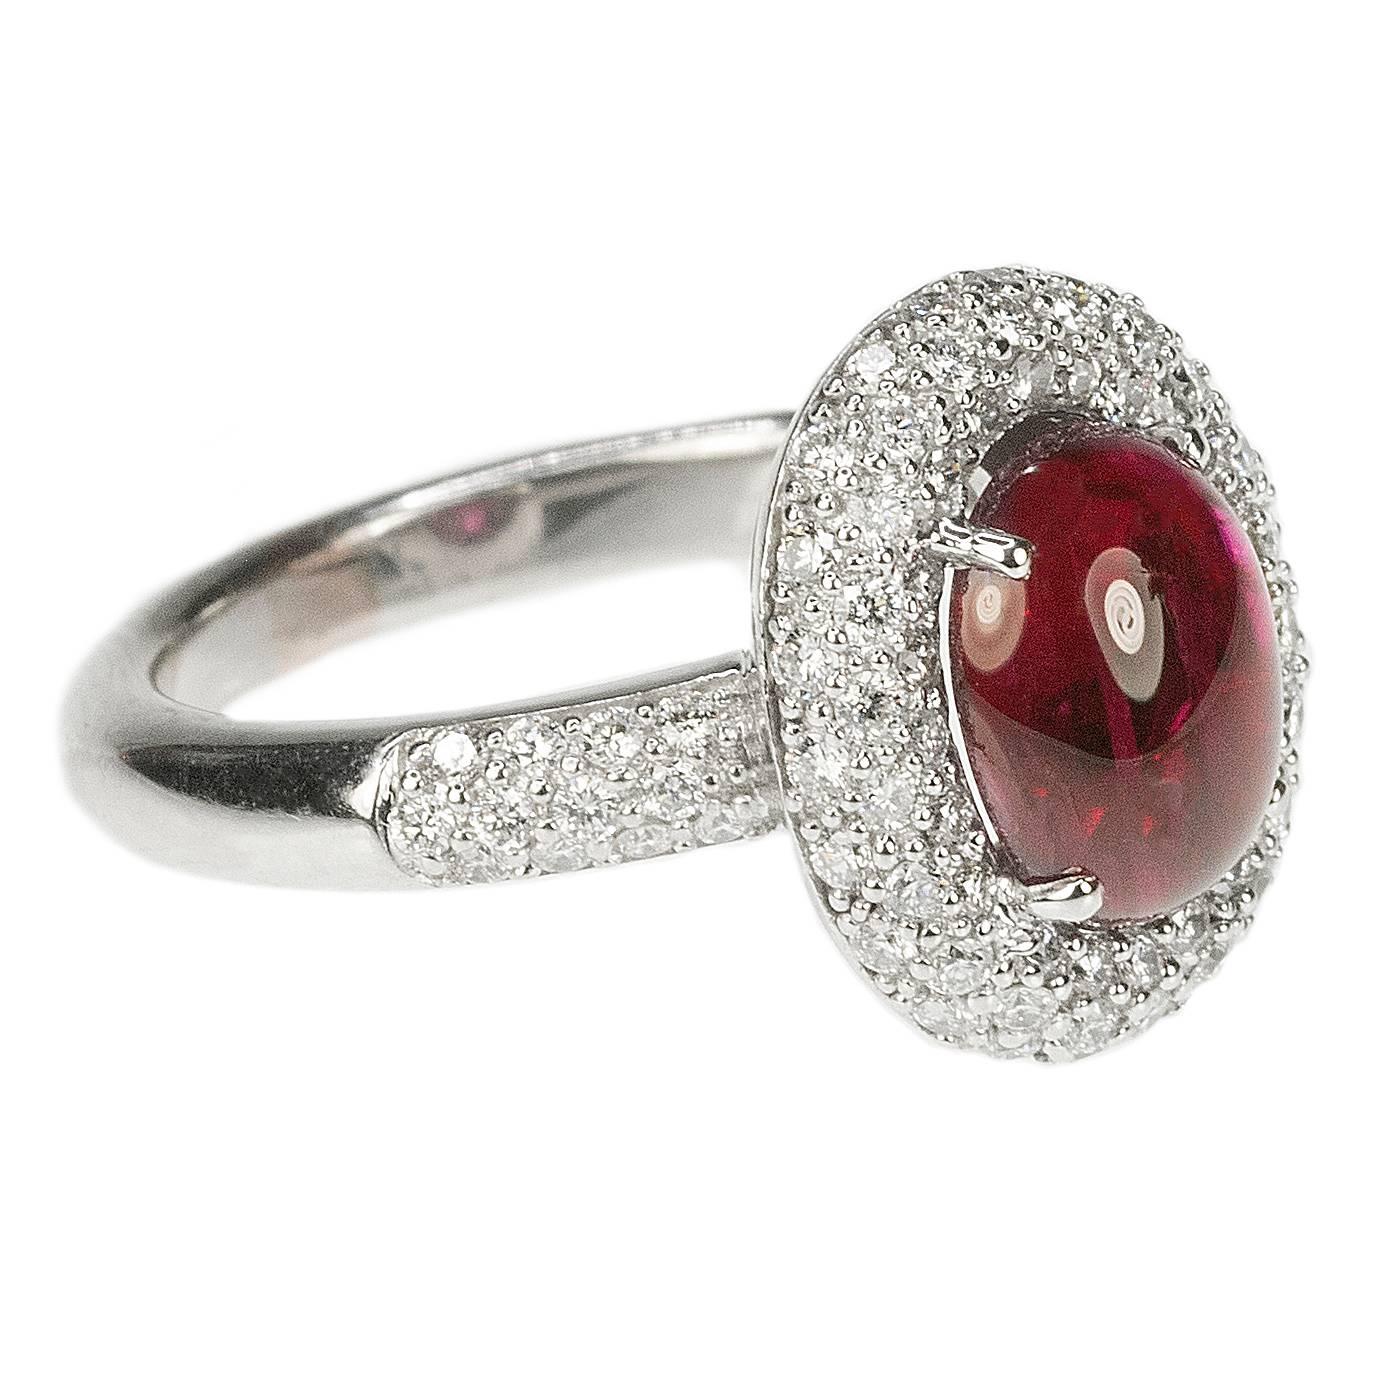 White Gold Ring with AGL certified 3.24 carat cabochon ruby and approximately 1.00 carats of modern round brilliant diamonds.